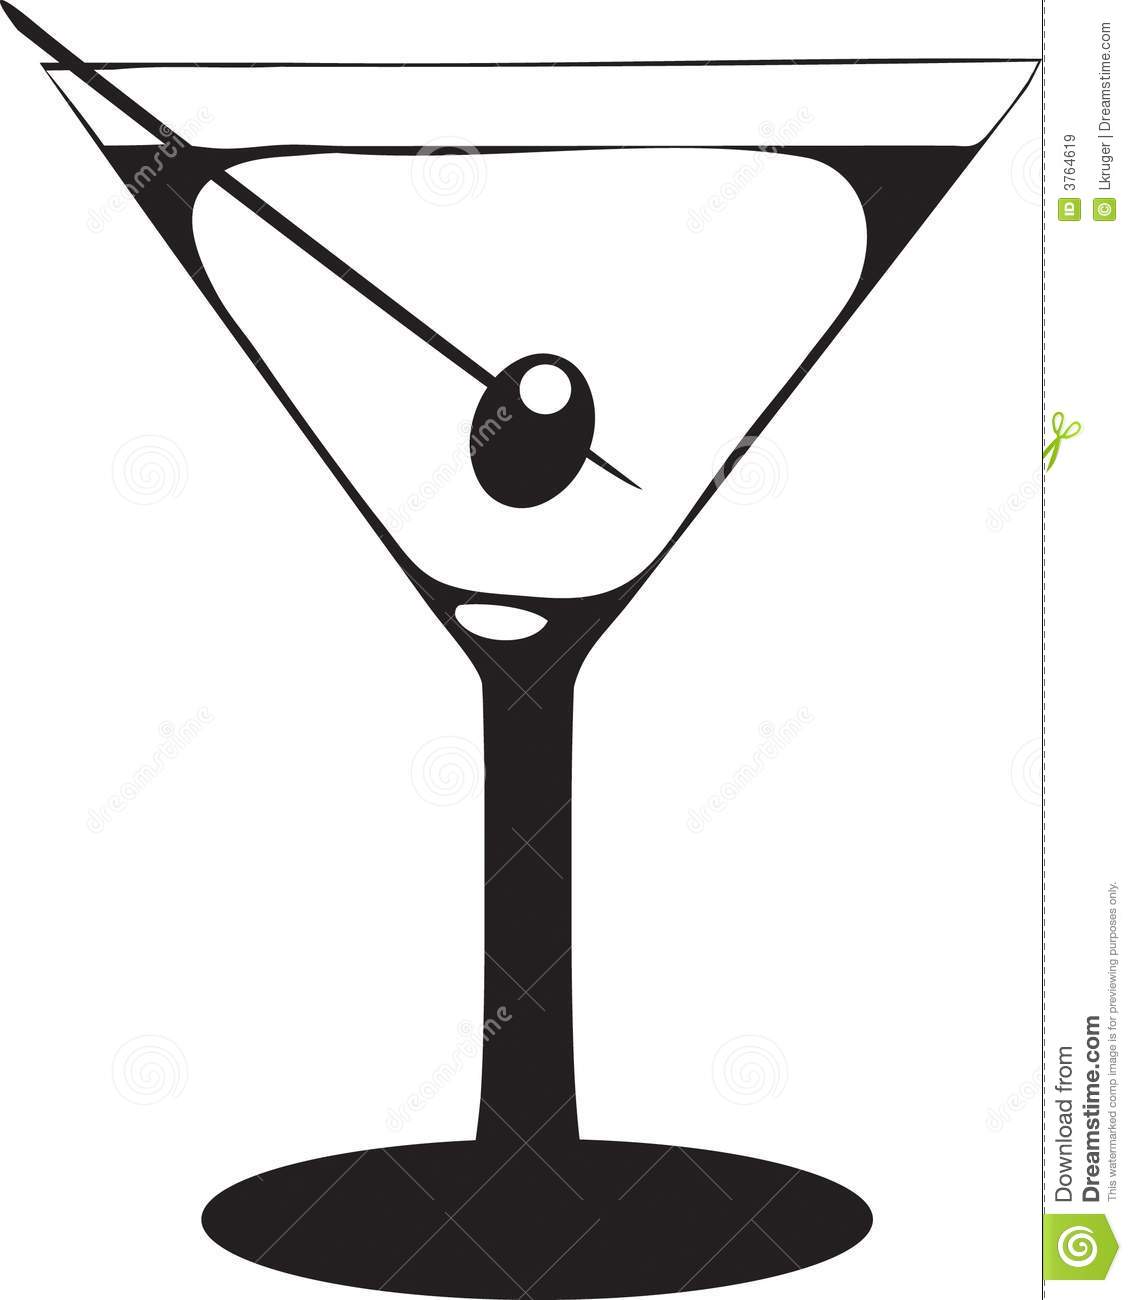 Martini Glass With Olive Roya - Clipart Martini Glass